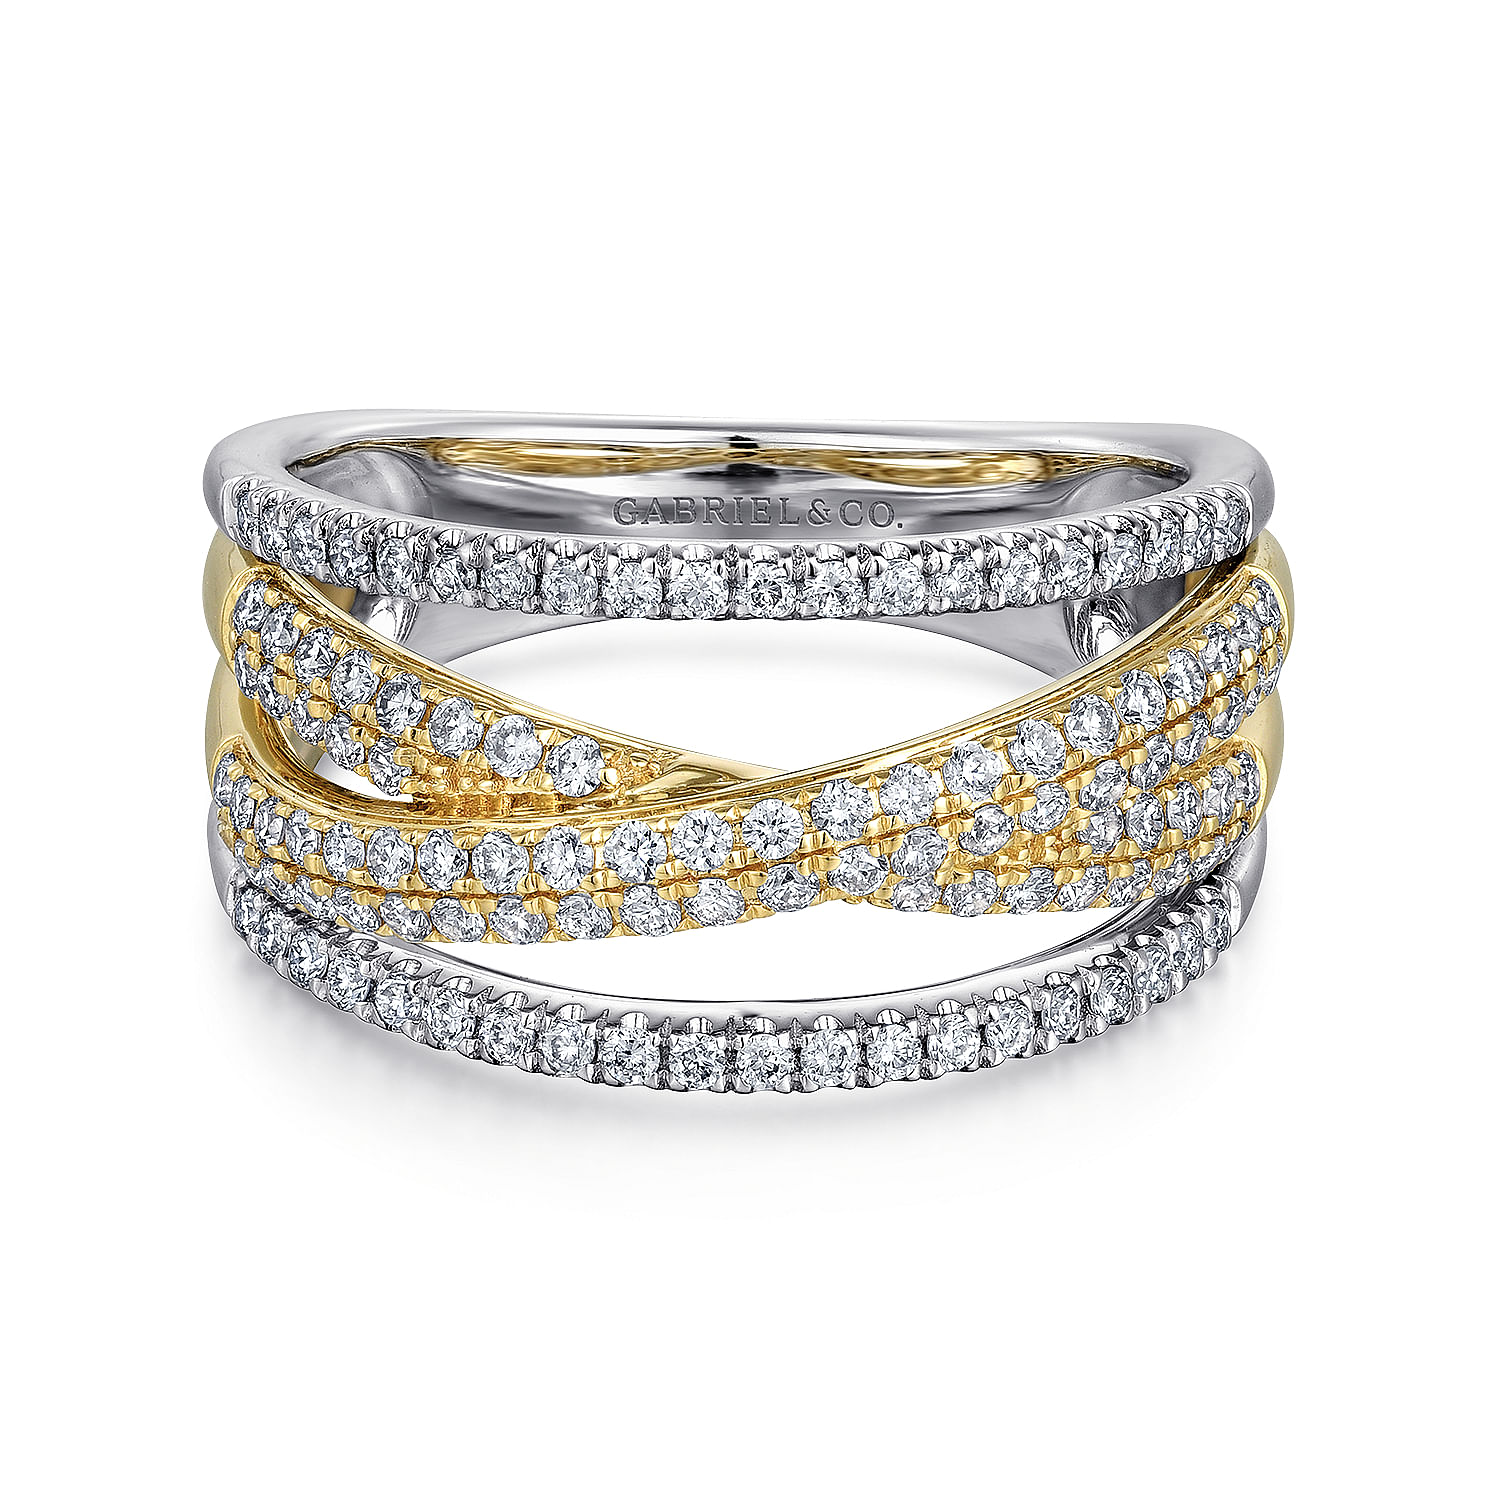 14K Yellow and White Gold Criss Crossing Multi Row Diamond Ring